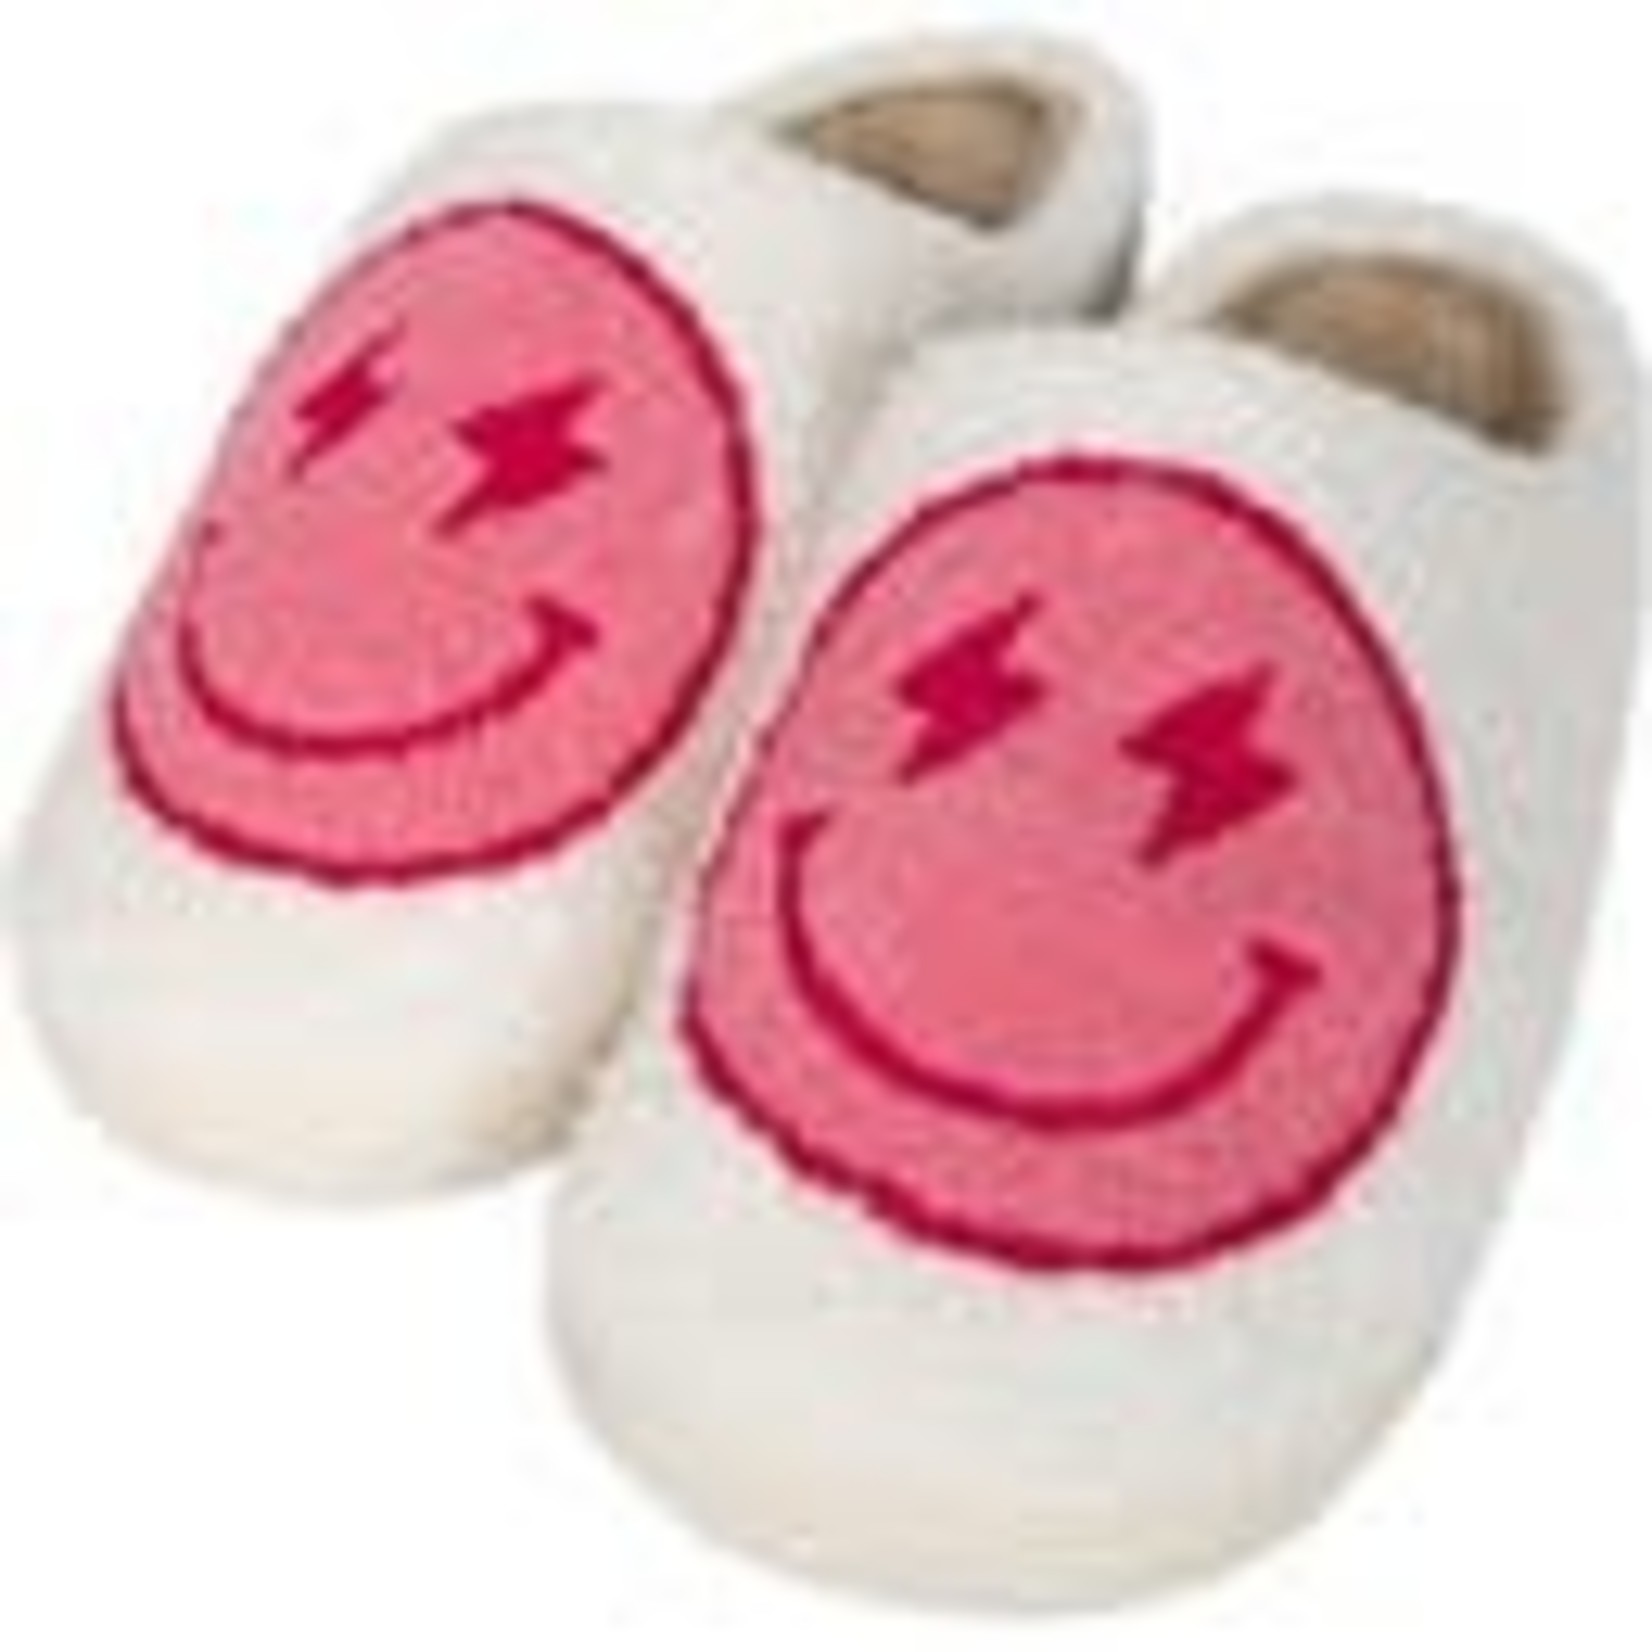 Katydid Smile Face Slippers with Lightning Bolts